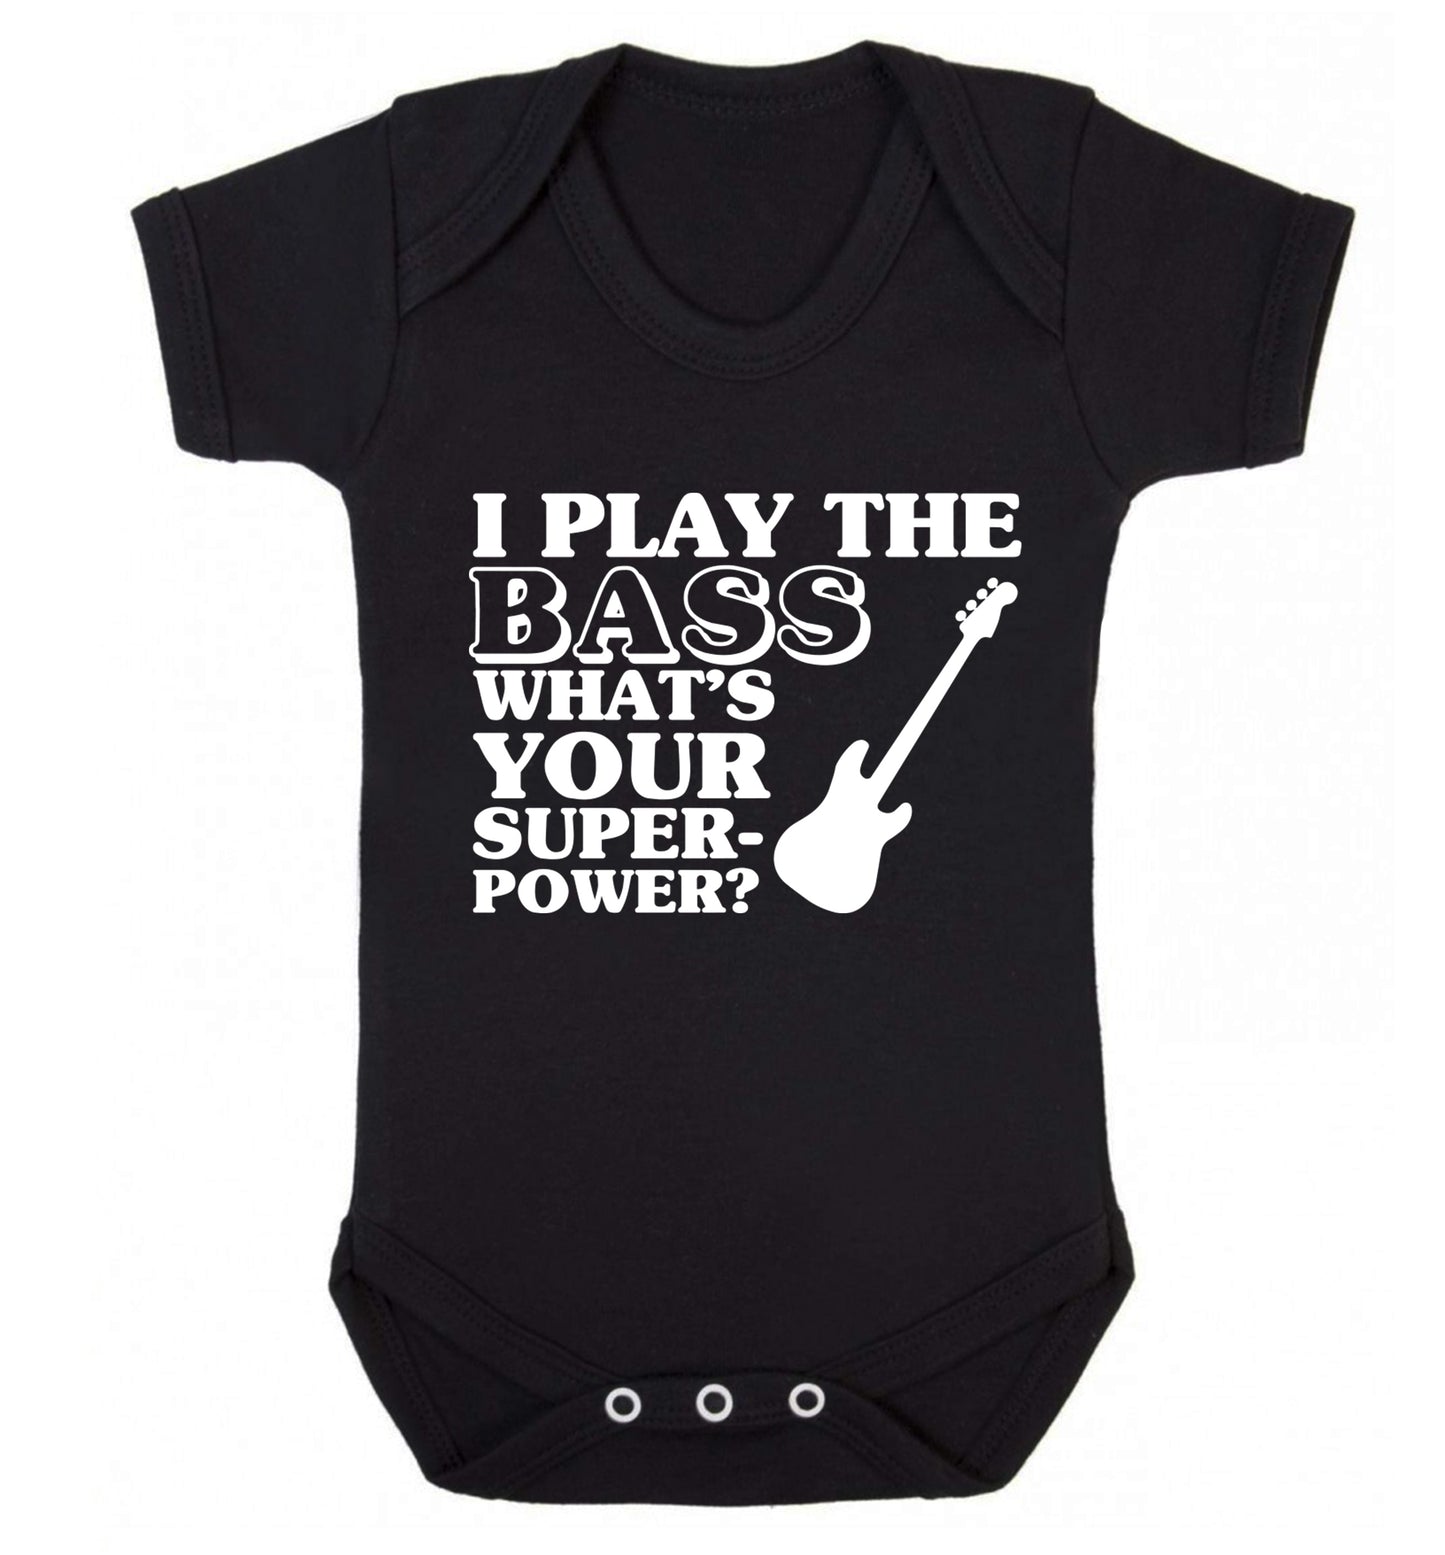 I play the bass what's your superpower? Baby Vest black 18-24 months